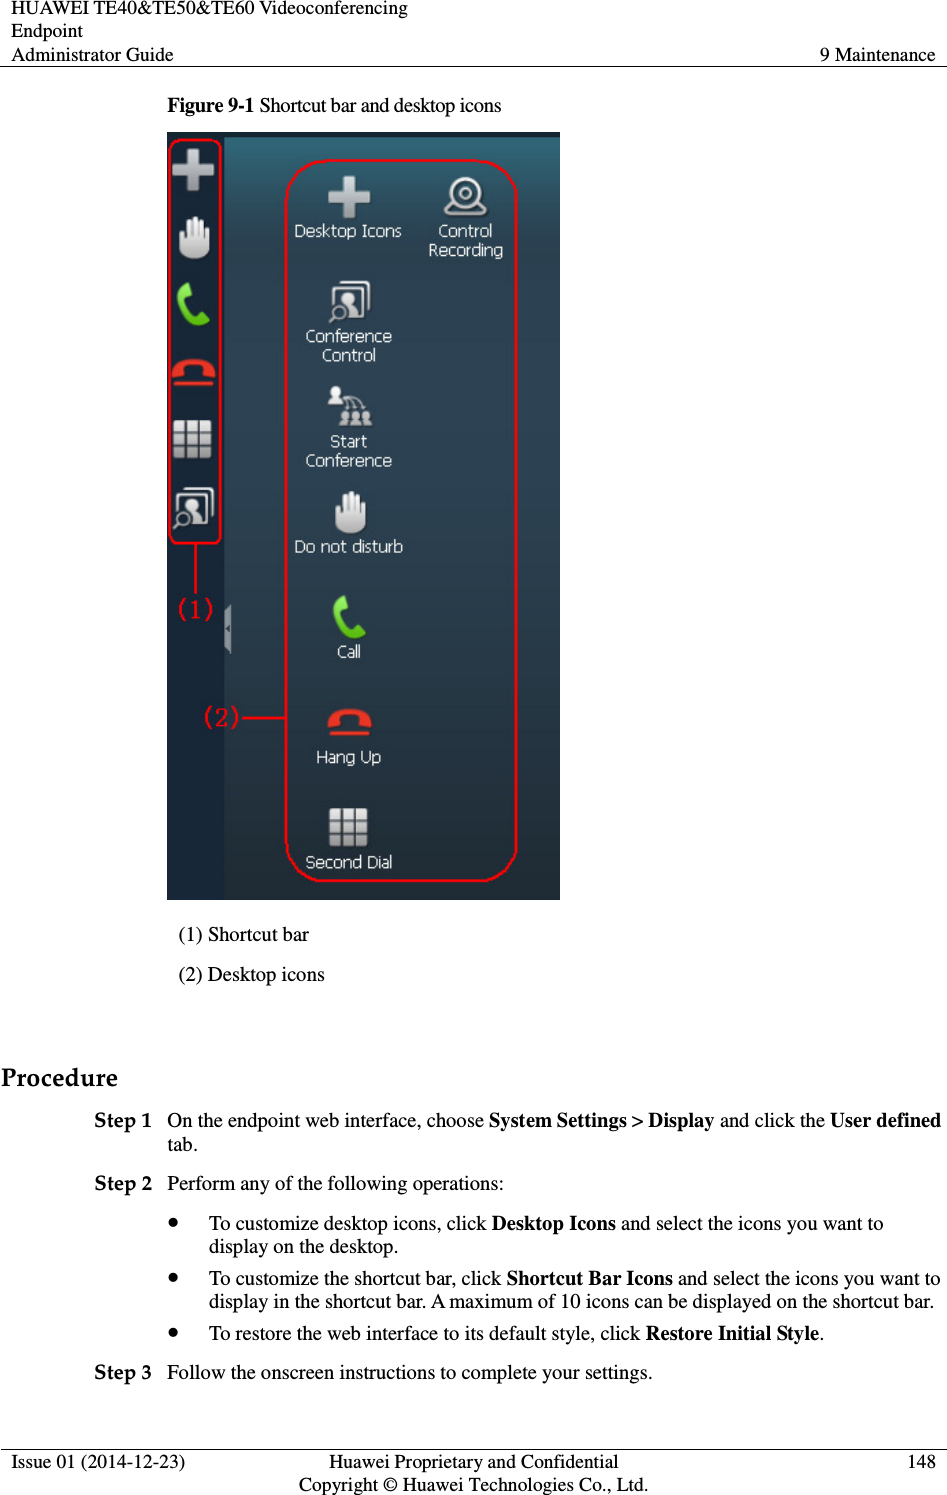 HUAWEI TE40&amp;TE50&amp;TE60 Videoconferencing Endpoint Administrator Guide  9 Maintenance  Issue 01 (2014-12-23)  Huawei Proprietary and Confidential                                     Copyright © Huawei Technologies Co., Ltd. 148  Figure 9-1 Shortcut bar and desktop icons  (1) Shortcut bar (2) Desktop icons  Procedure Step 1 On the endpoint web interface, choose System Settings &gt; Display and click the User defined tab. Step 2 Perform any of the following operations:  To customize desktop icons, click Desktop Icons and select the icons you want to display on the desktop.  To customize the shortcut bar, click Shortcut Bar Icons and select the icons you want to display in the shortcut bar. A maximum of 10 icons can be displayed on the shortcut bar.  To restore the web interface to its default style, click Restore Initial Style. Step 3 Follow the onscreen instructions to complete your settings. 